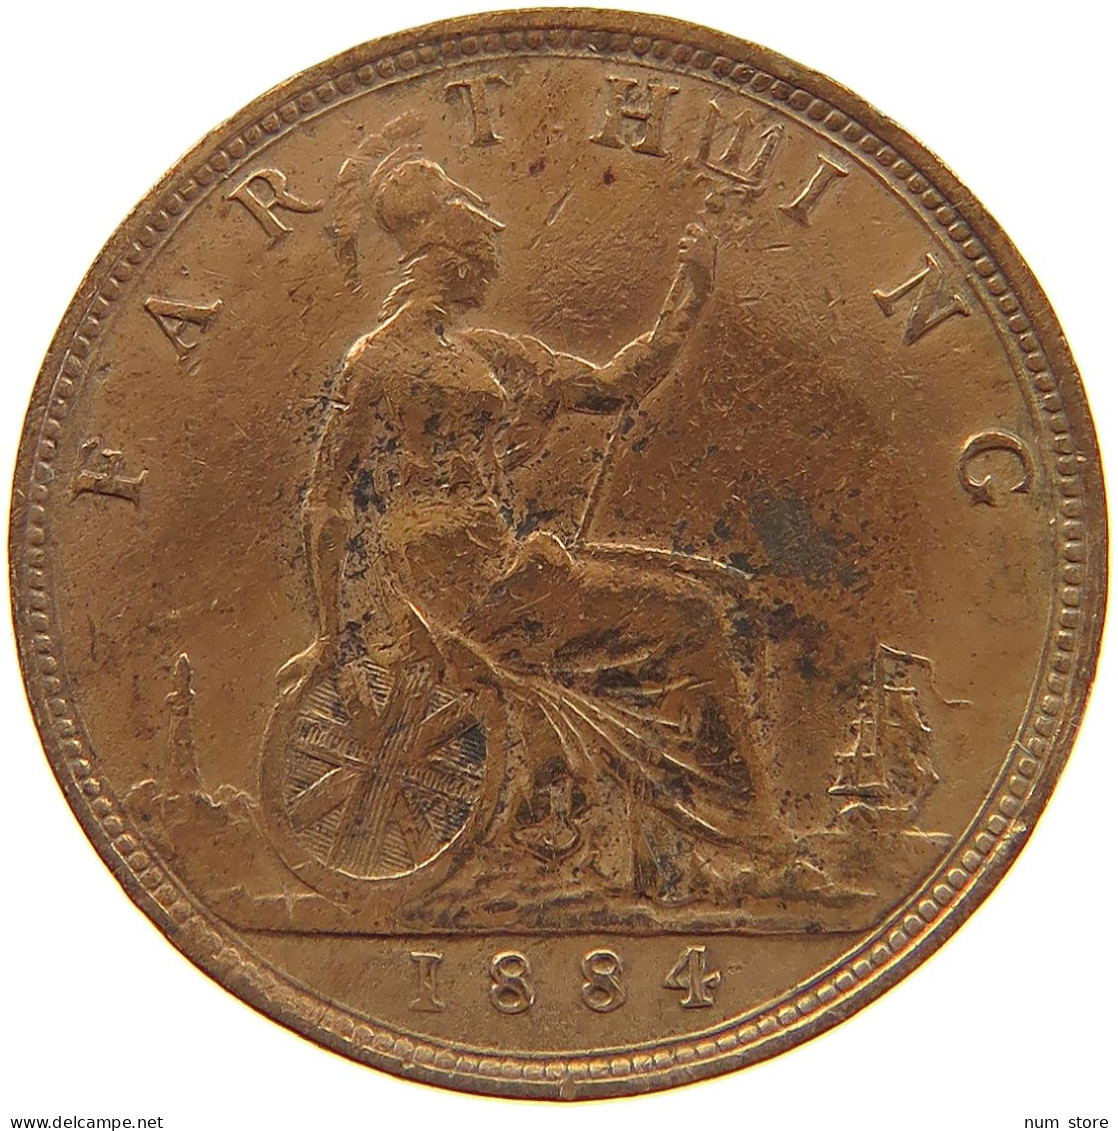 GREAT BRITAIN FARTHING 1884 Victoria 1837-1901 #a011 0857 - B. 1 Farthing